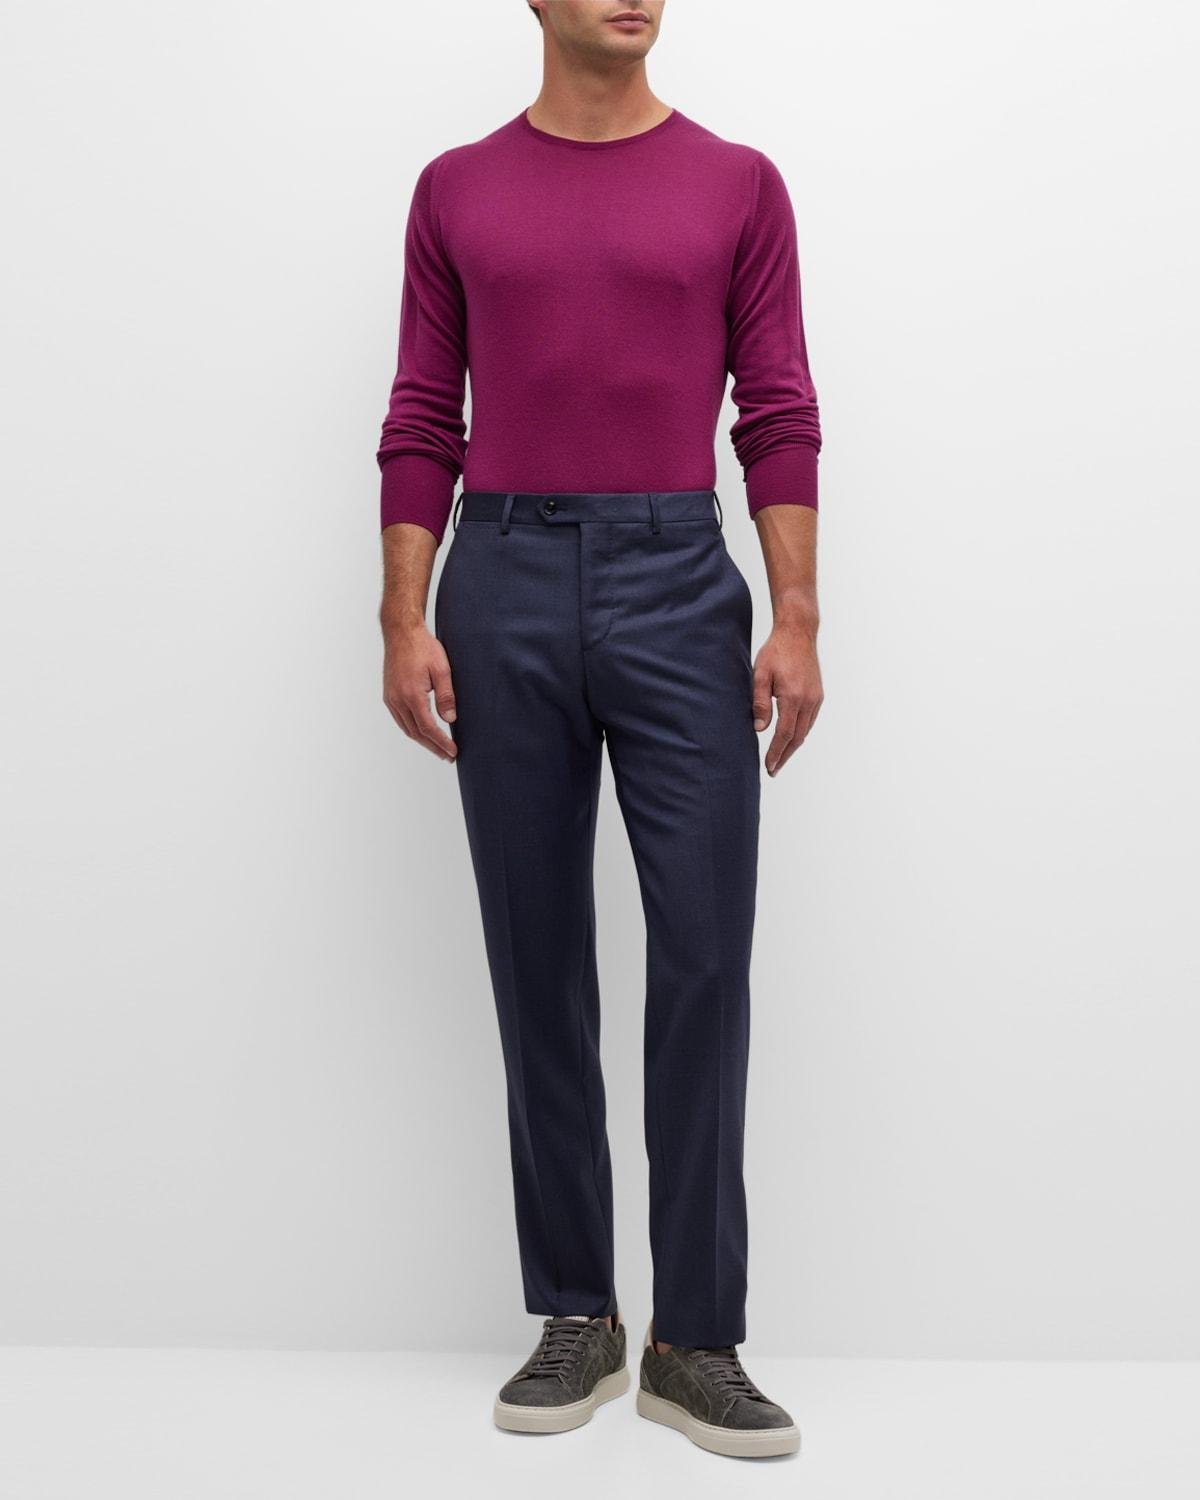 Men's Solid Wool Dress Pants by GIORGIO ARMANI